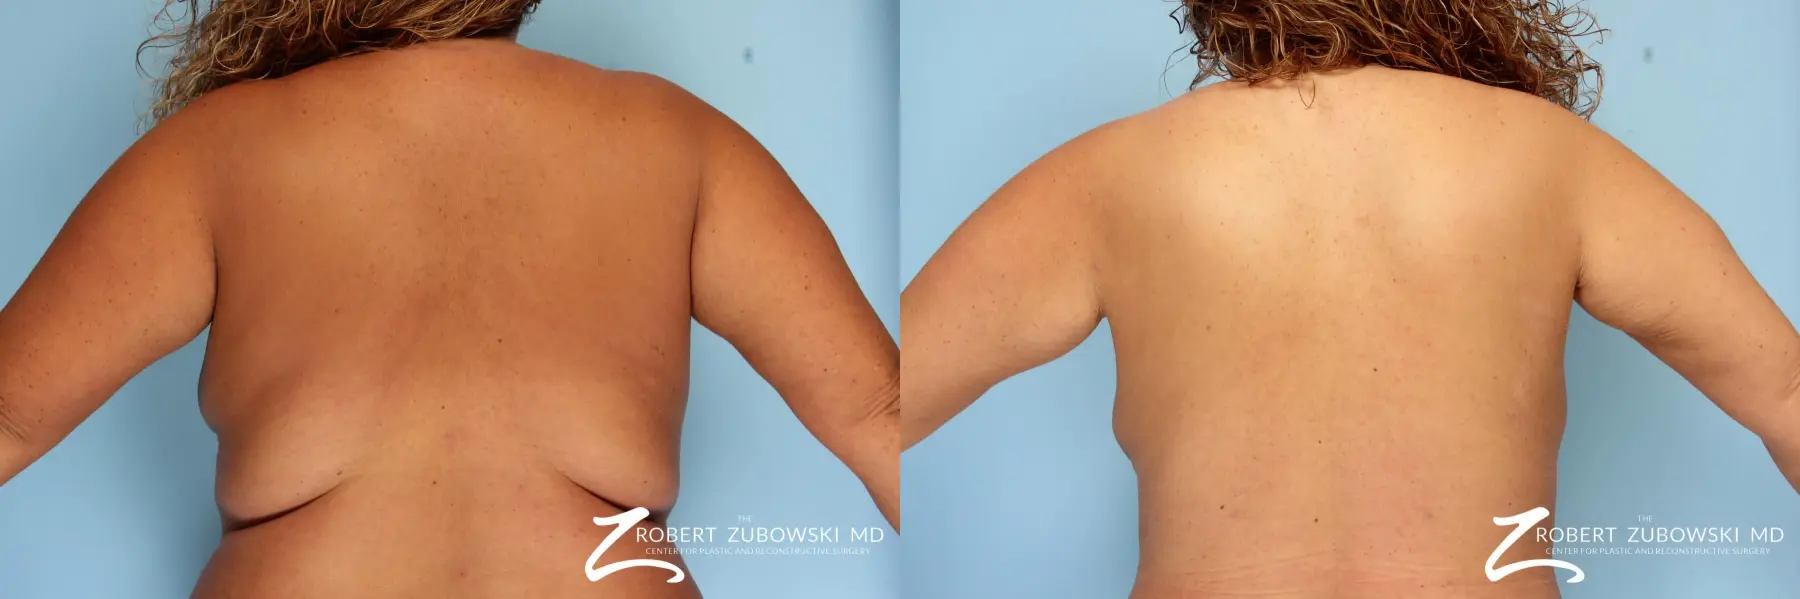 Liposuction: Patient 4 - Before and After 1